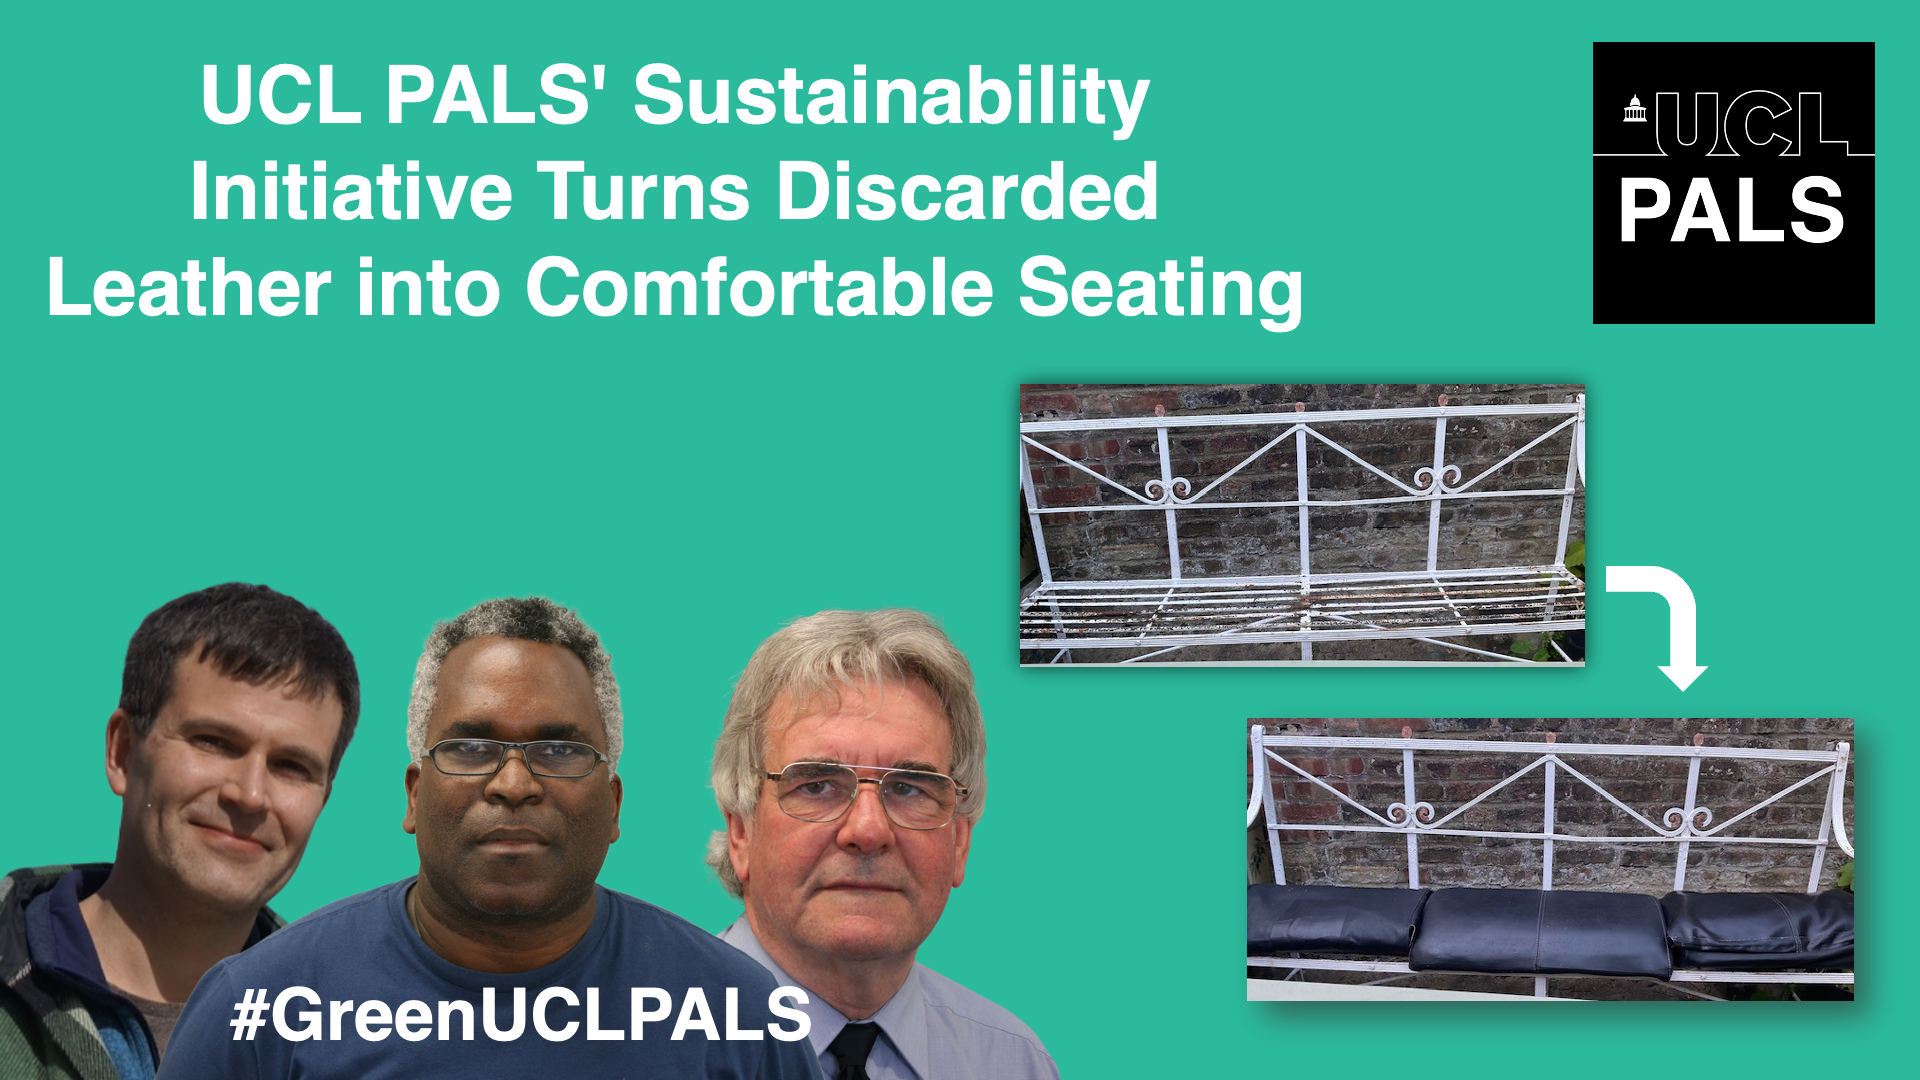 UCL PALS Sustainability Initiative Turns Discarded Leather into Comfortable Seating